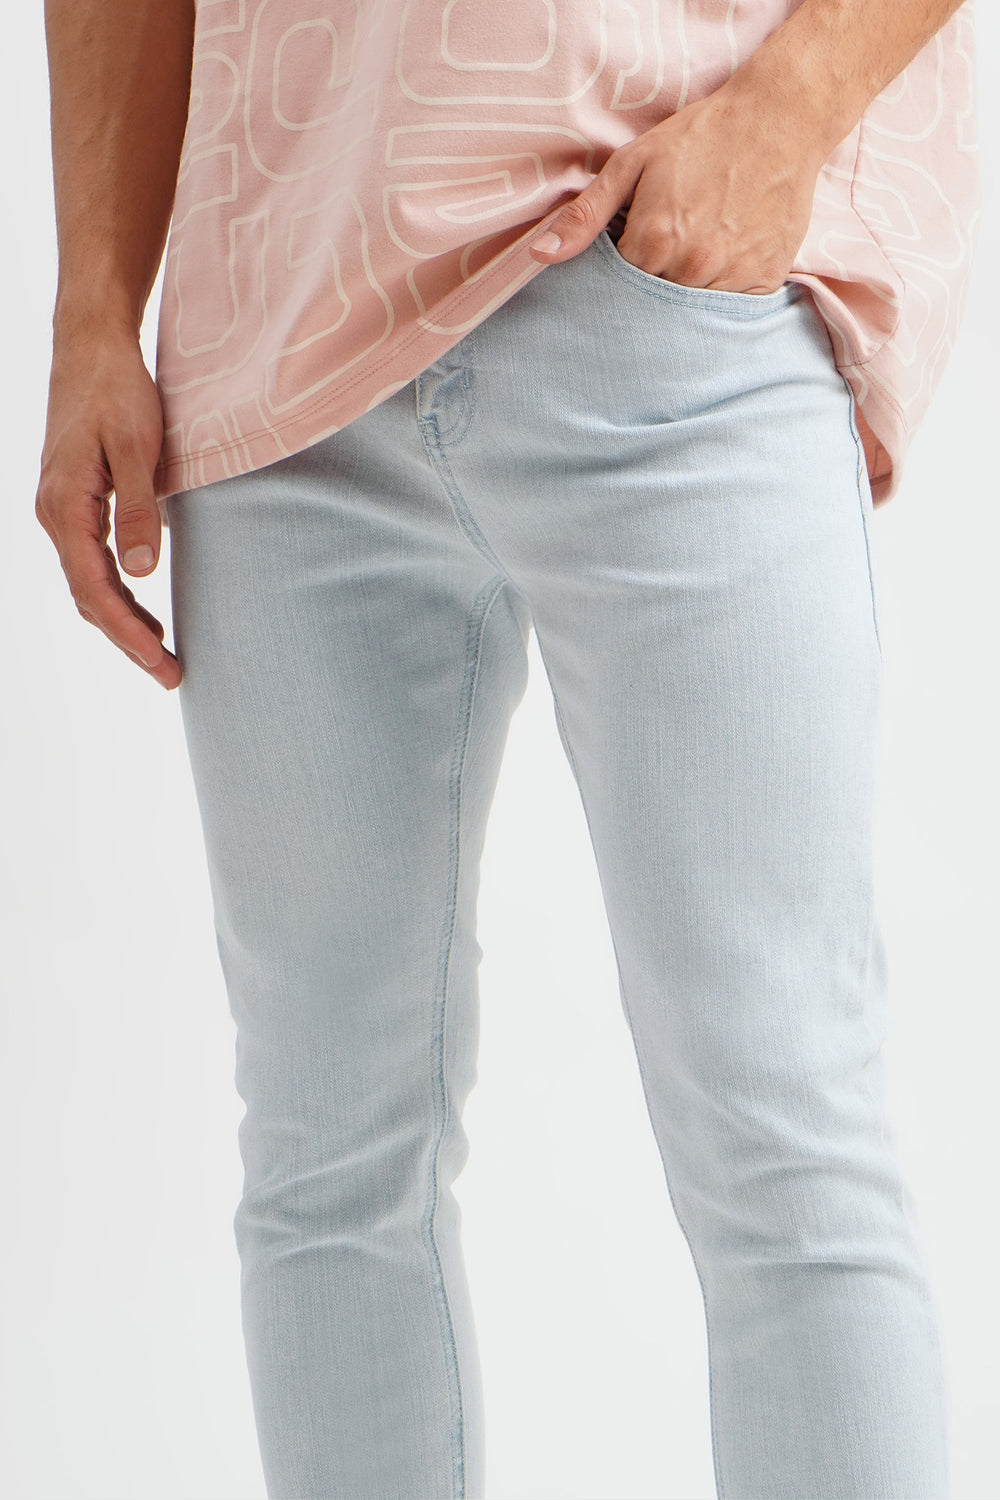 Men's The Conscious Generation Skinny Jeans